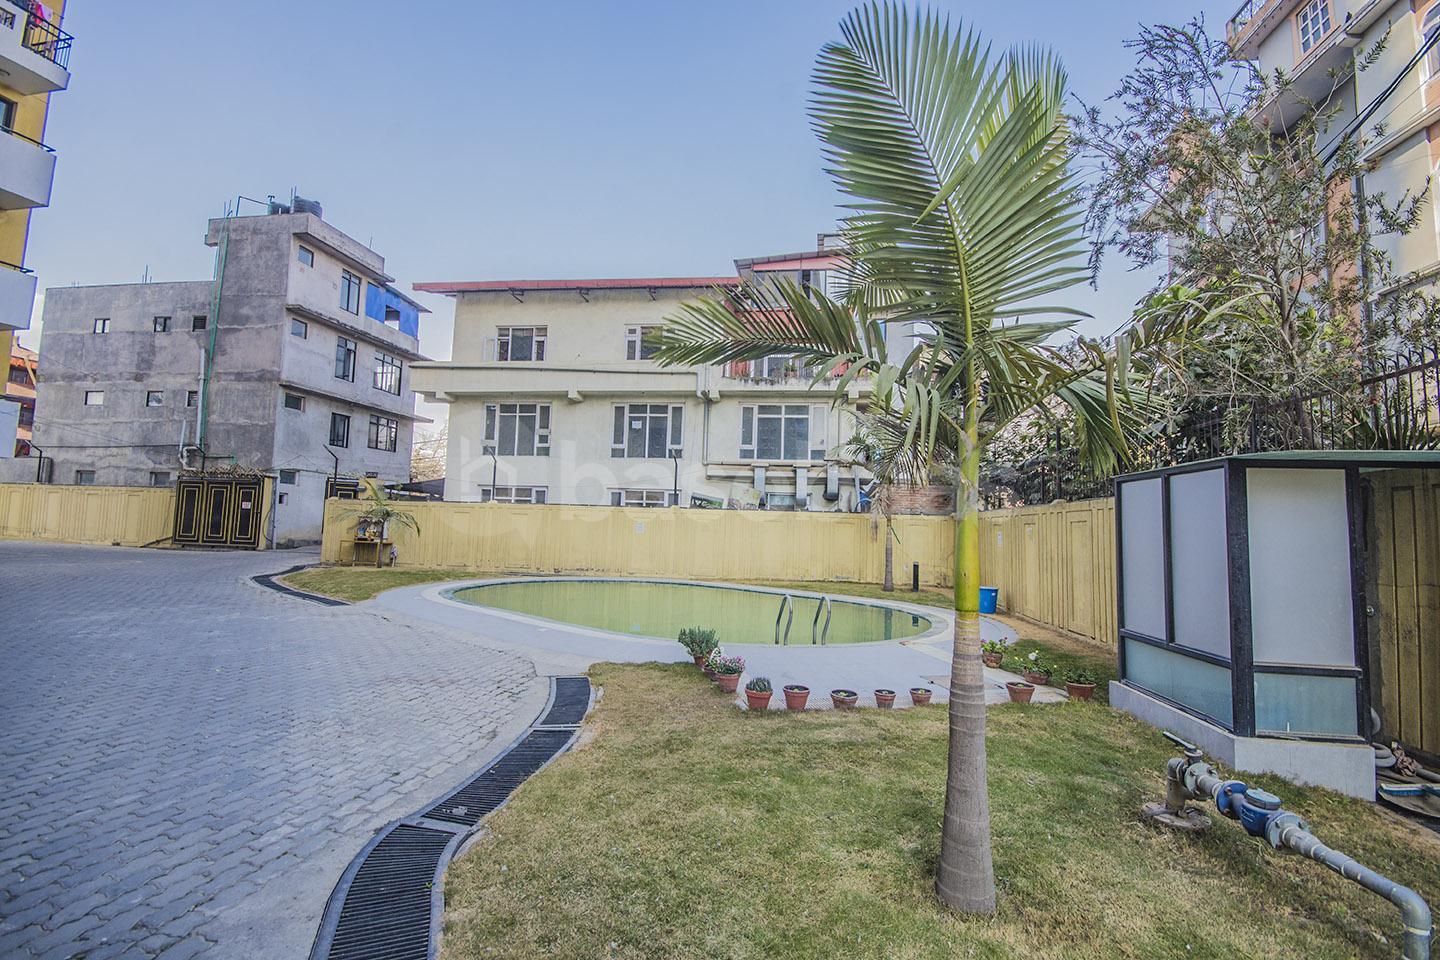 SOLD OUT: Apartment : Apartment for Sale in Jhamsikhel, Lalitpur Image 5